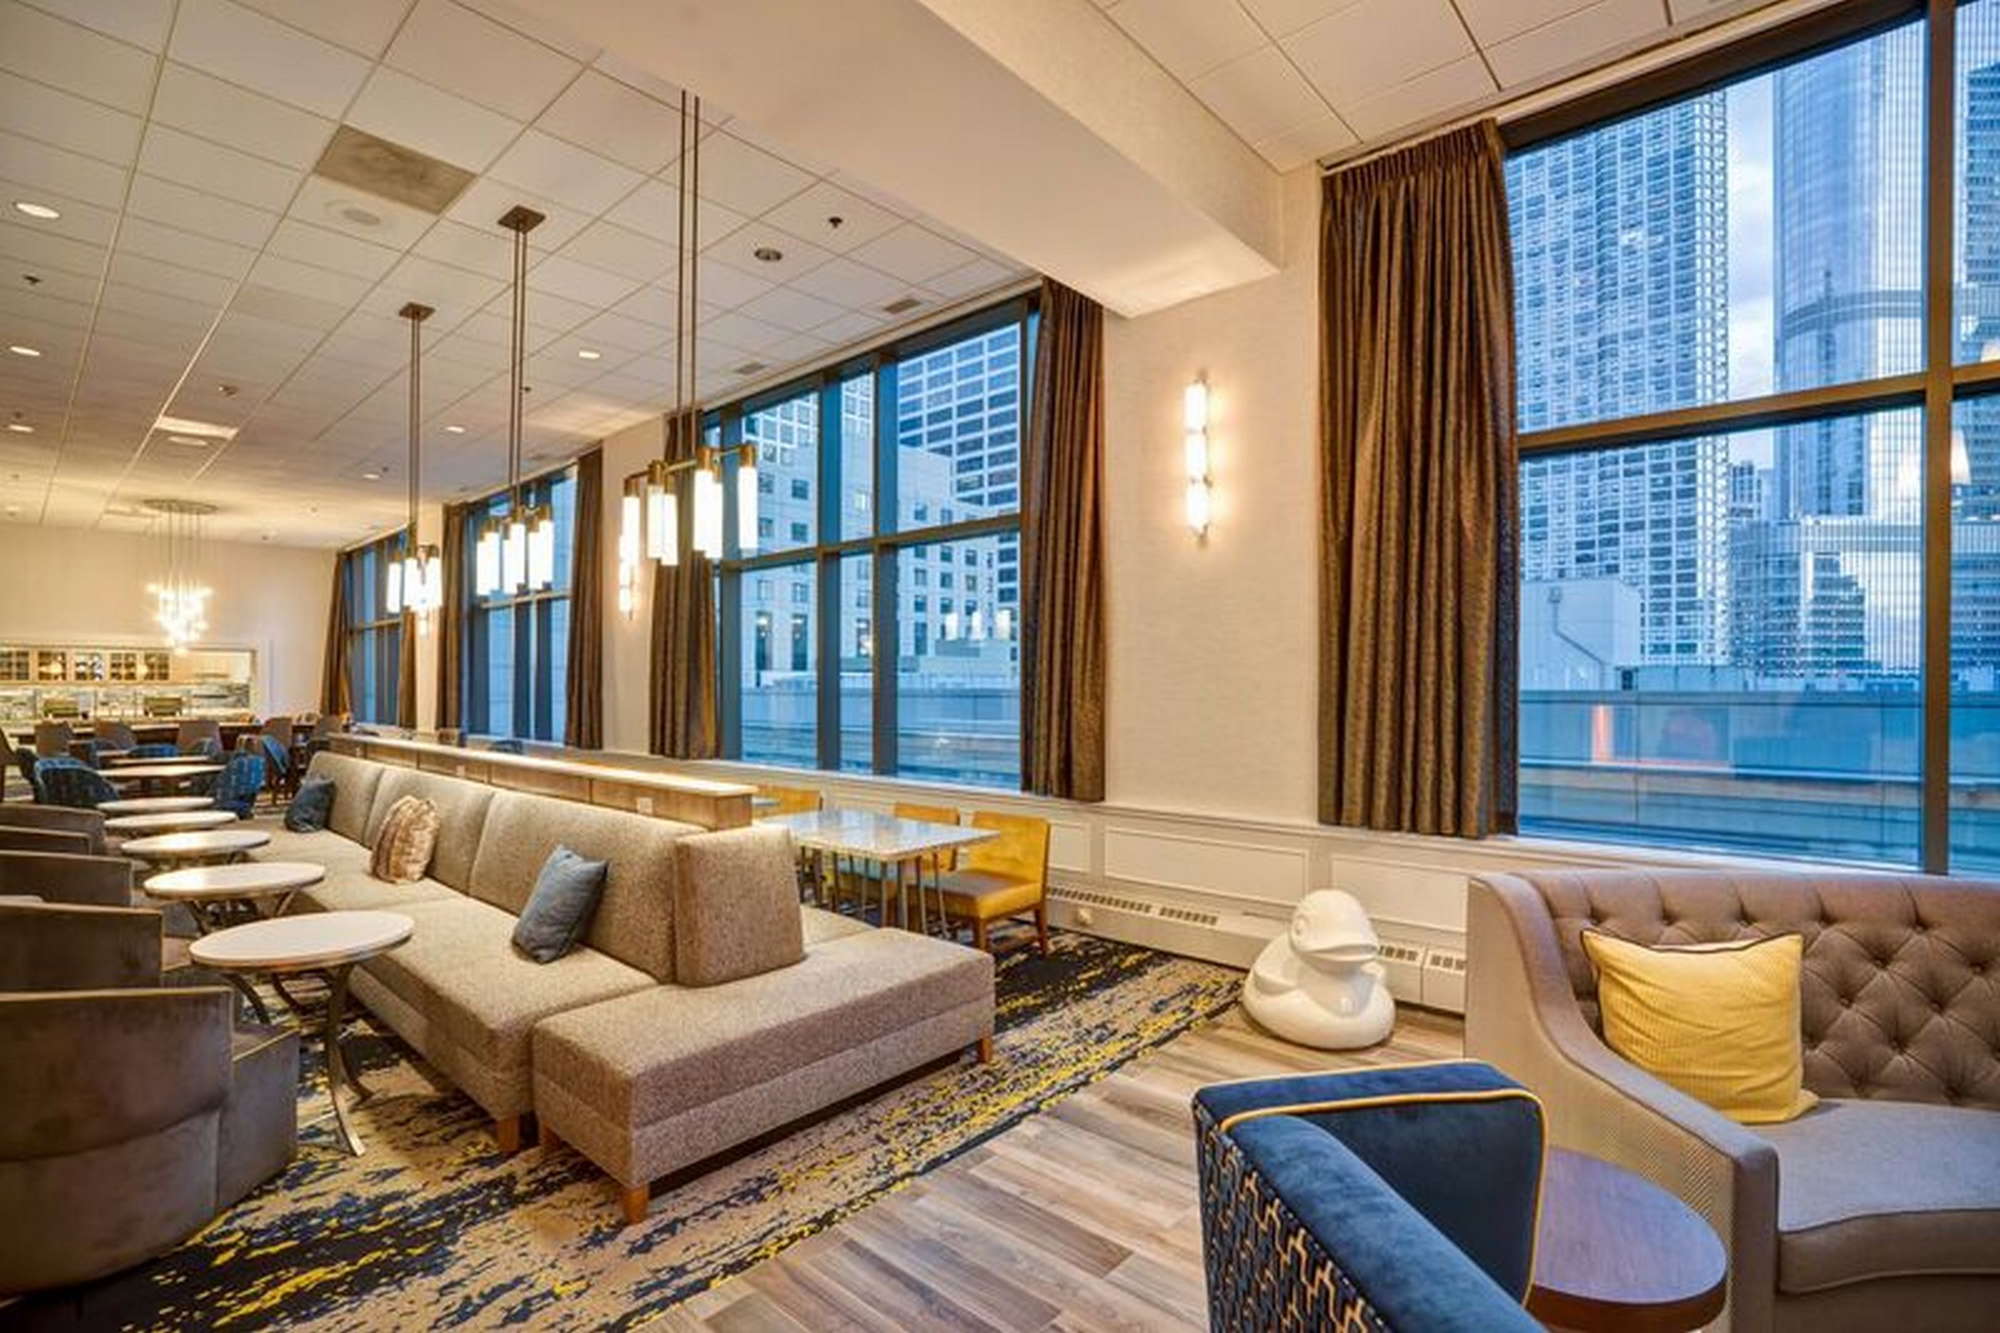 Homewood Suites By Hilton Chicago Downtown Expert Review